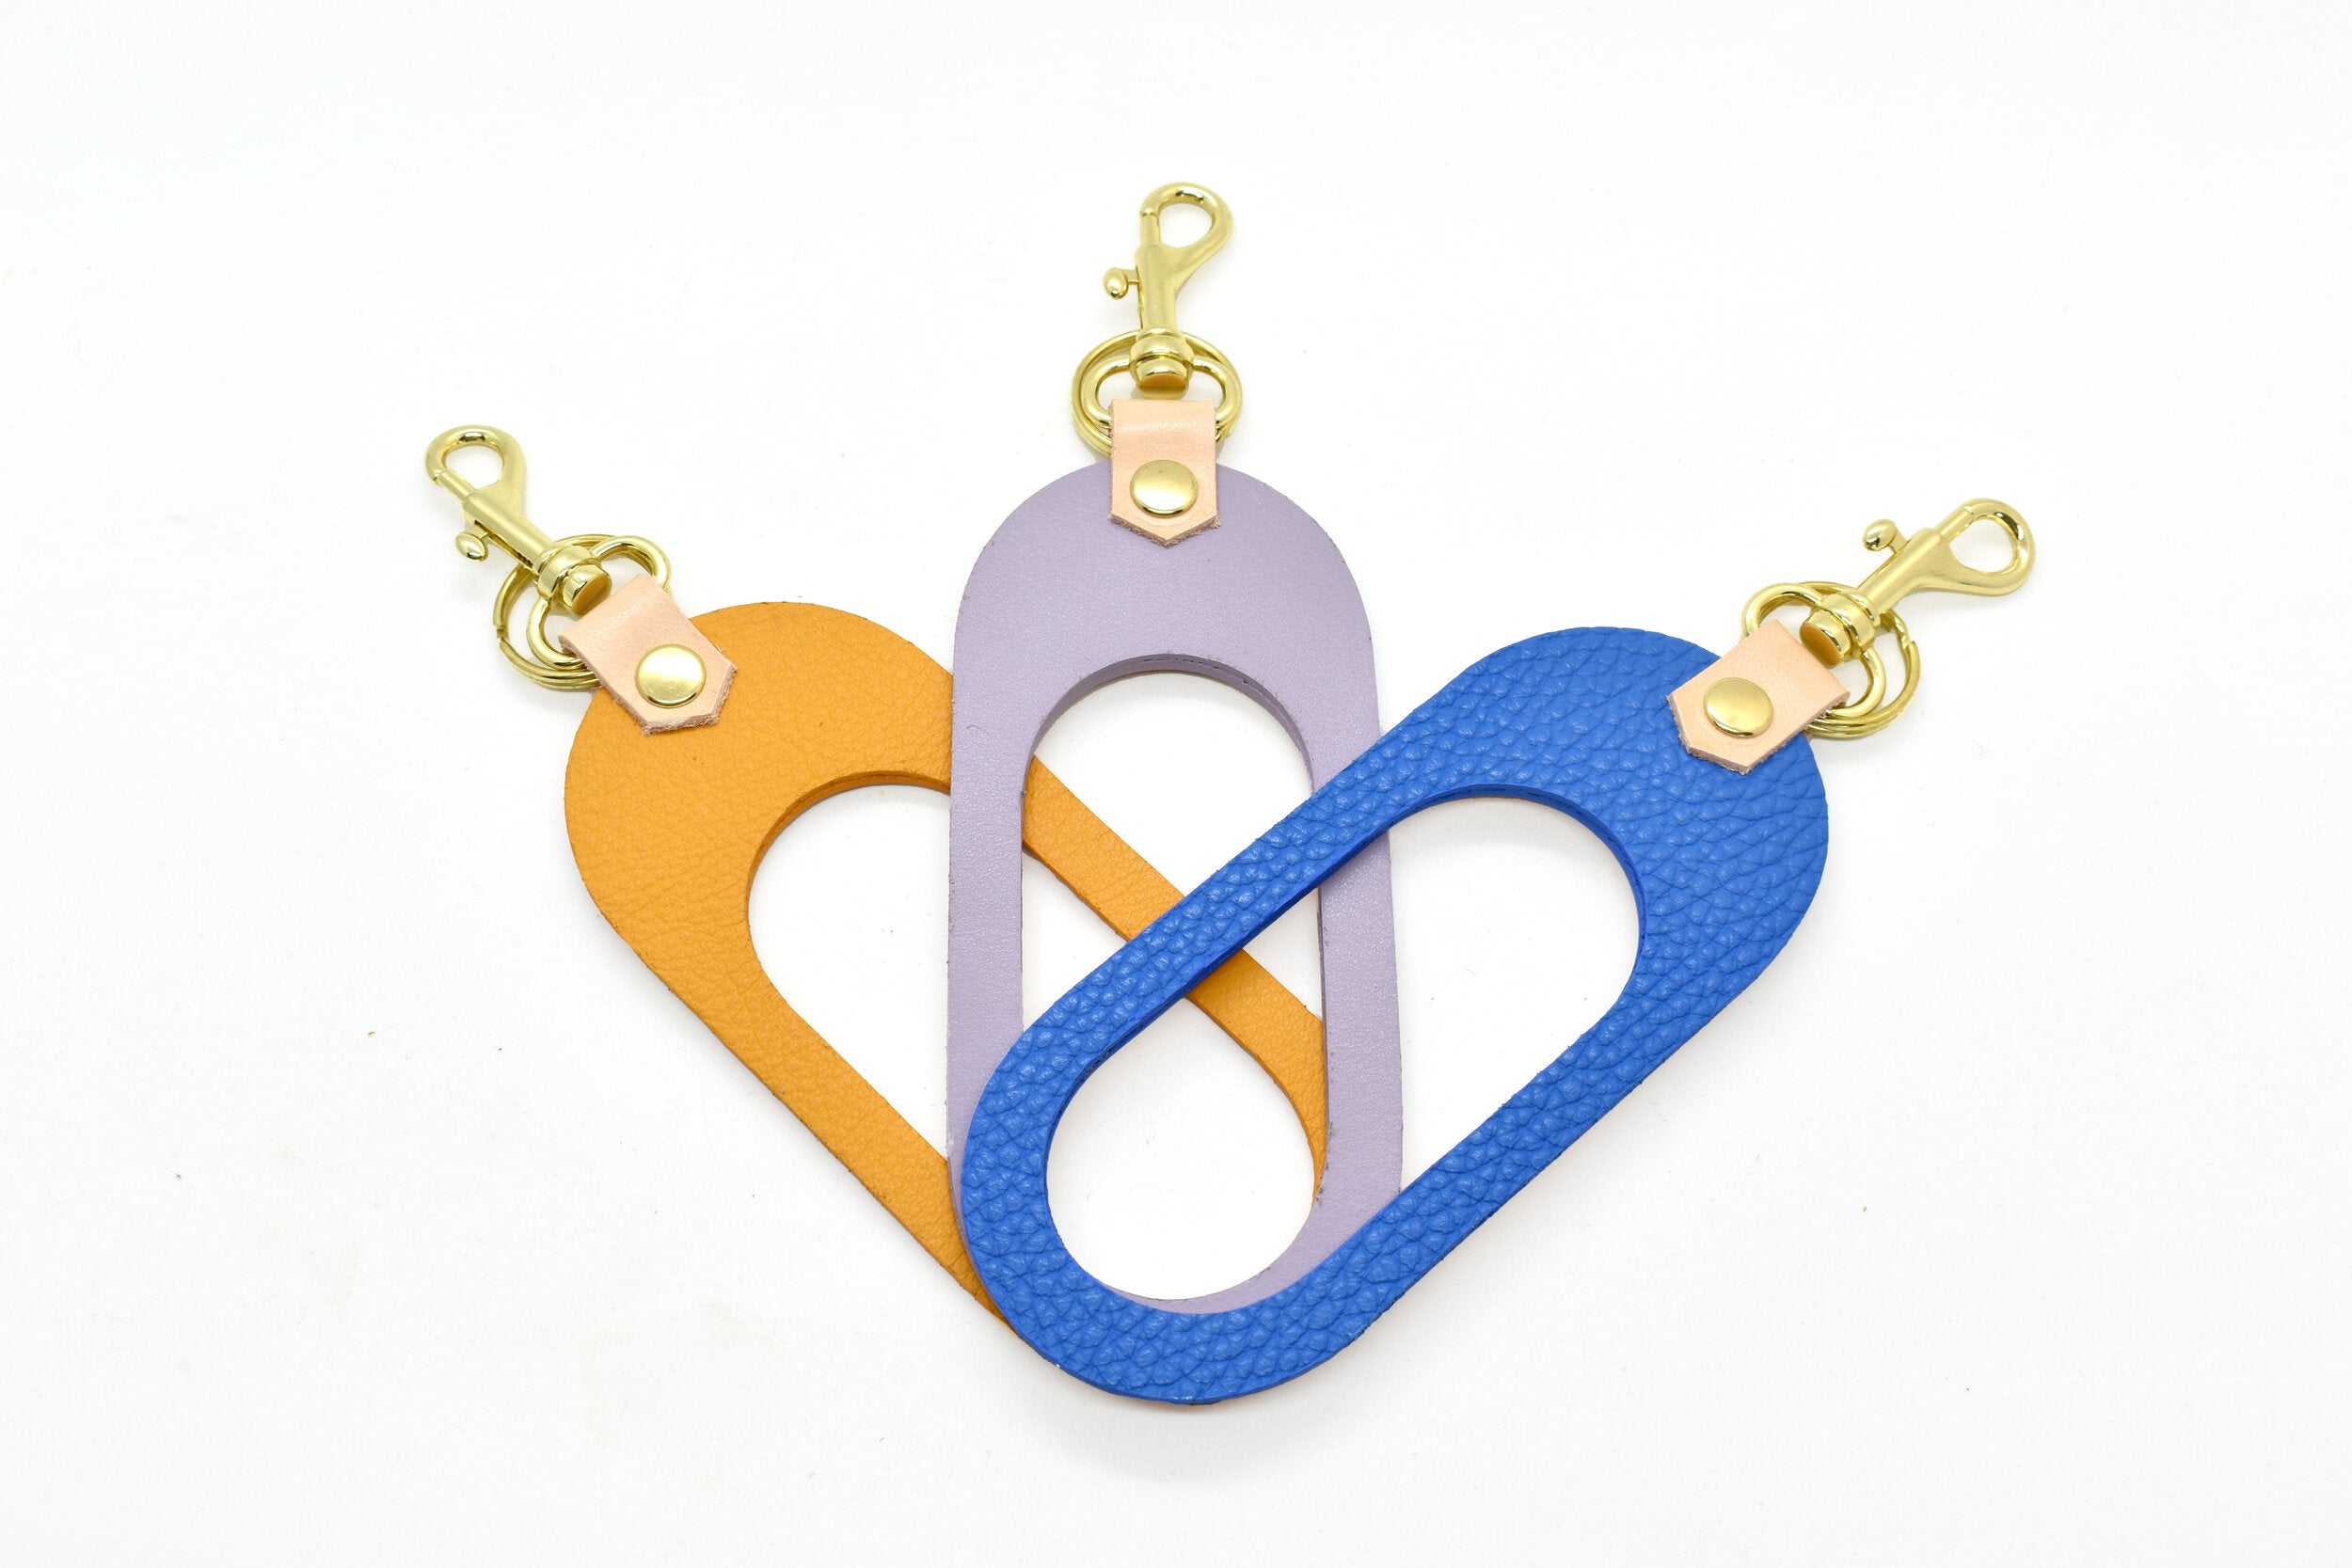 marigold lavender matisse blue leather cut out keychains with gold hardware keyring and veg tan leather side